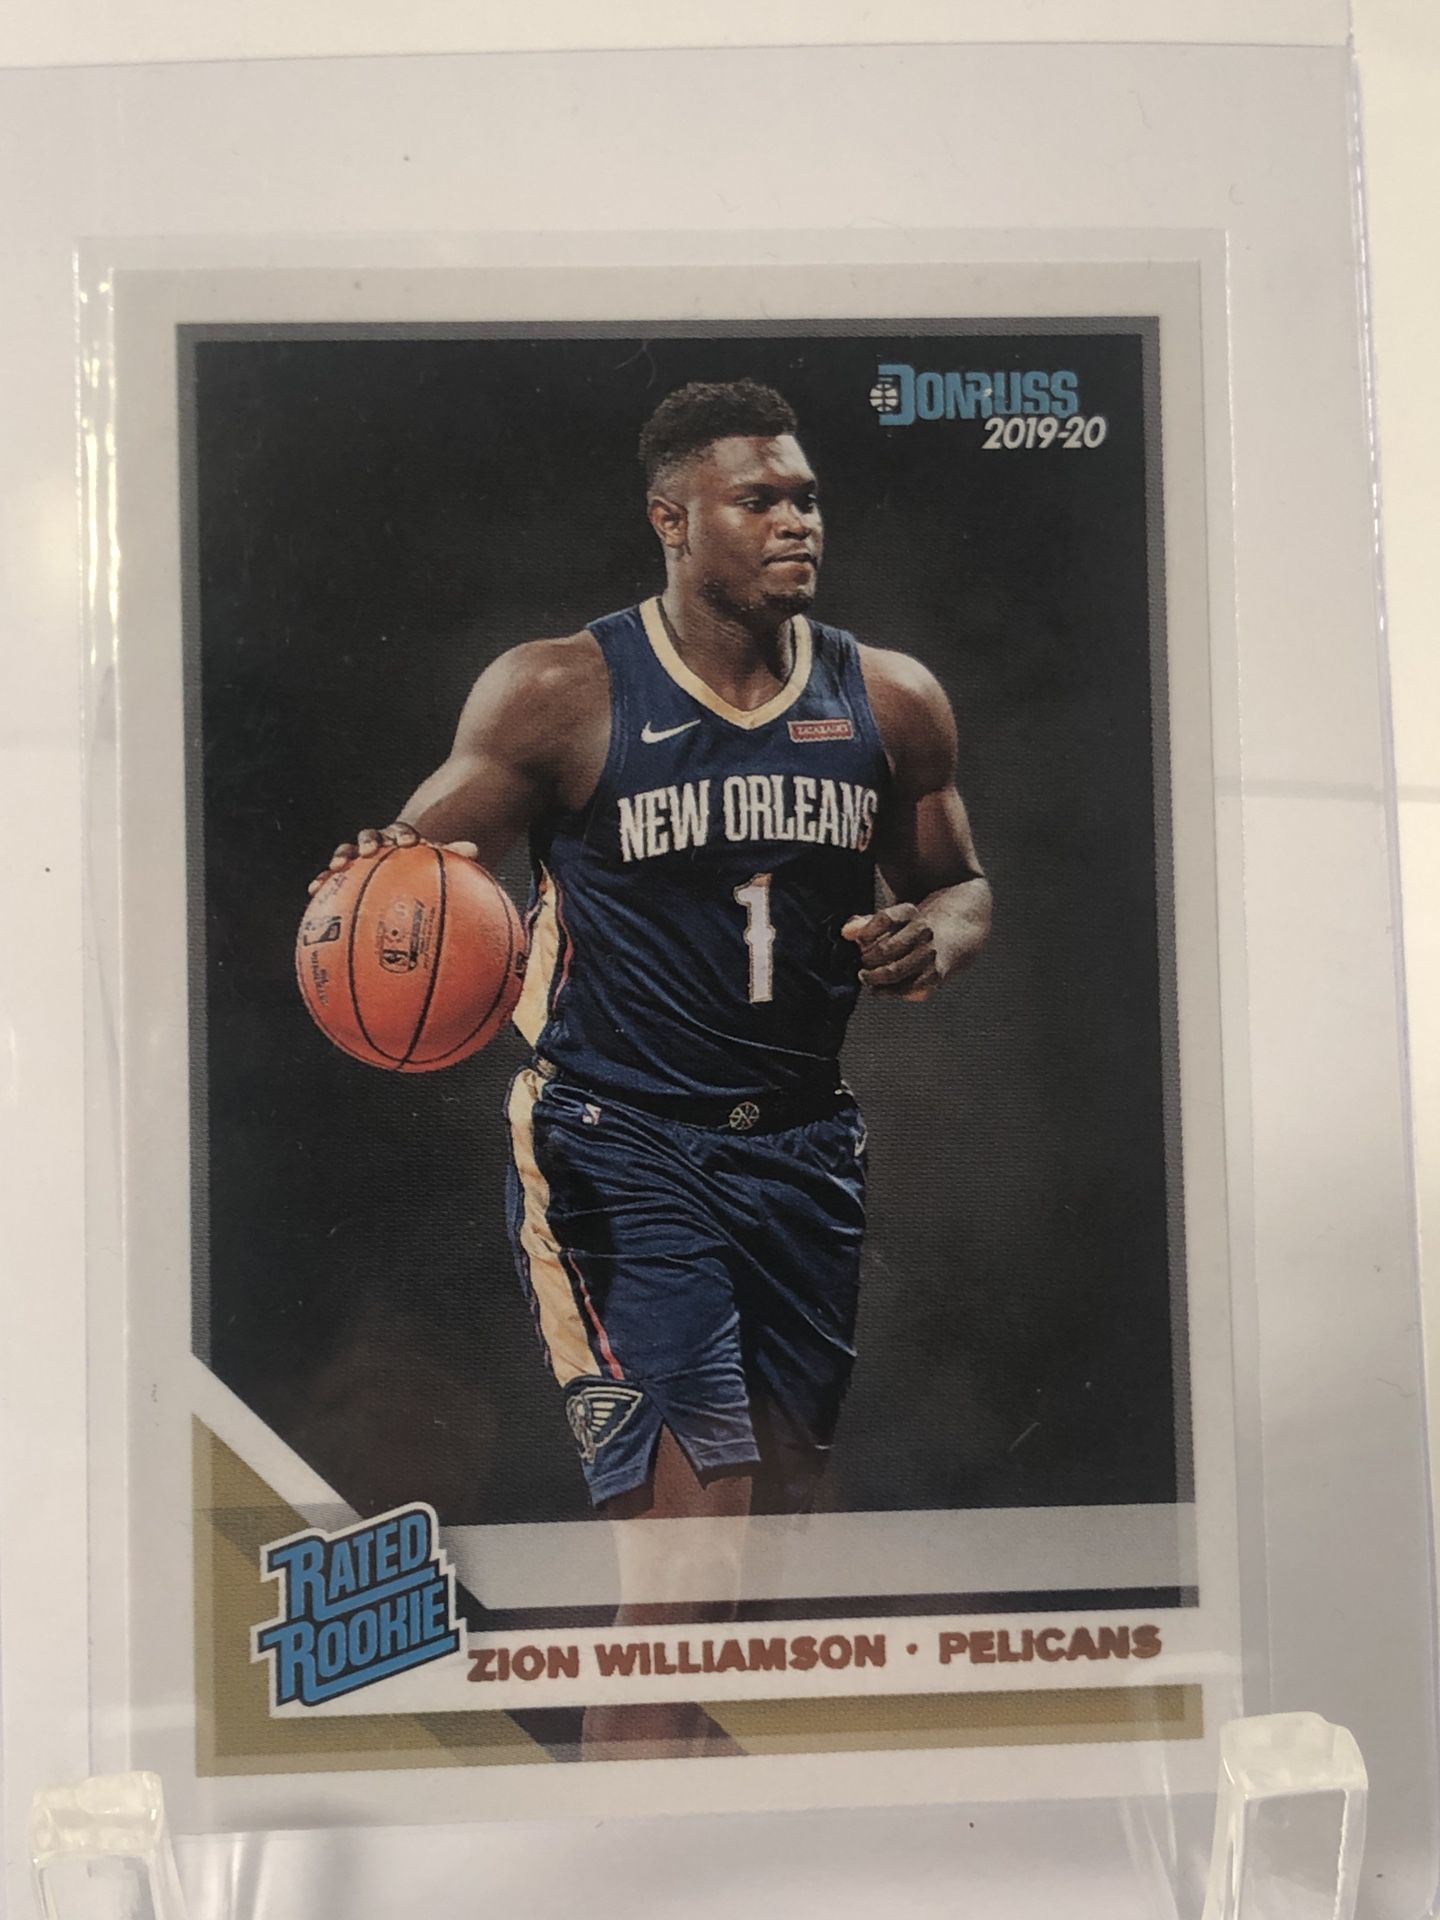 Zion Williamson 2019-20 Donruss Rated Rookie Base #201 RC - Pelicans